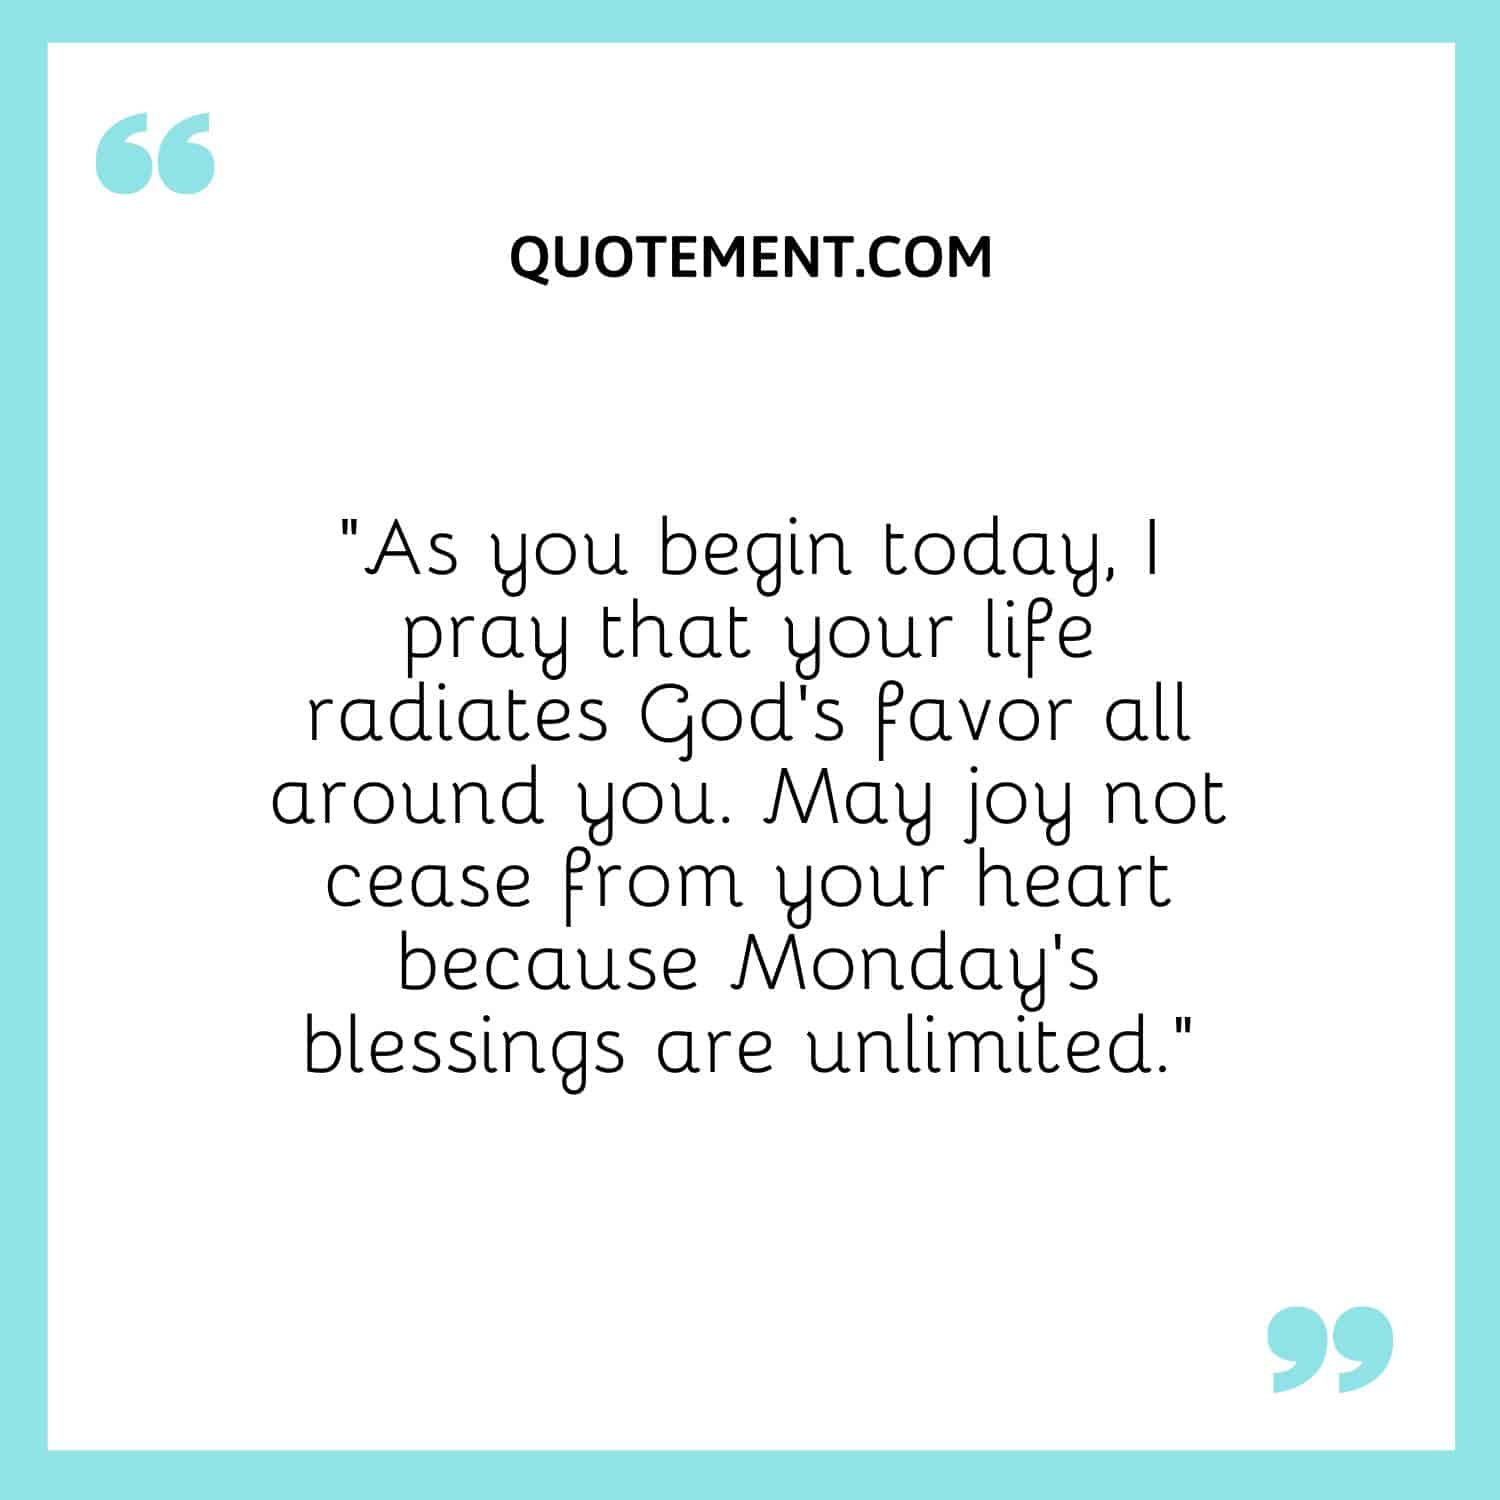 As you begin today, I pray that your life radiates God’s favor all around you